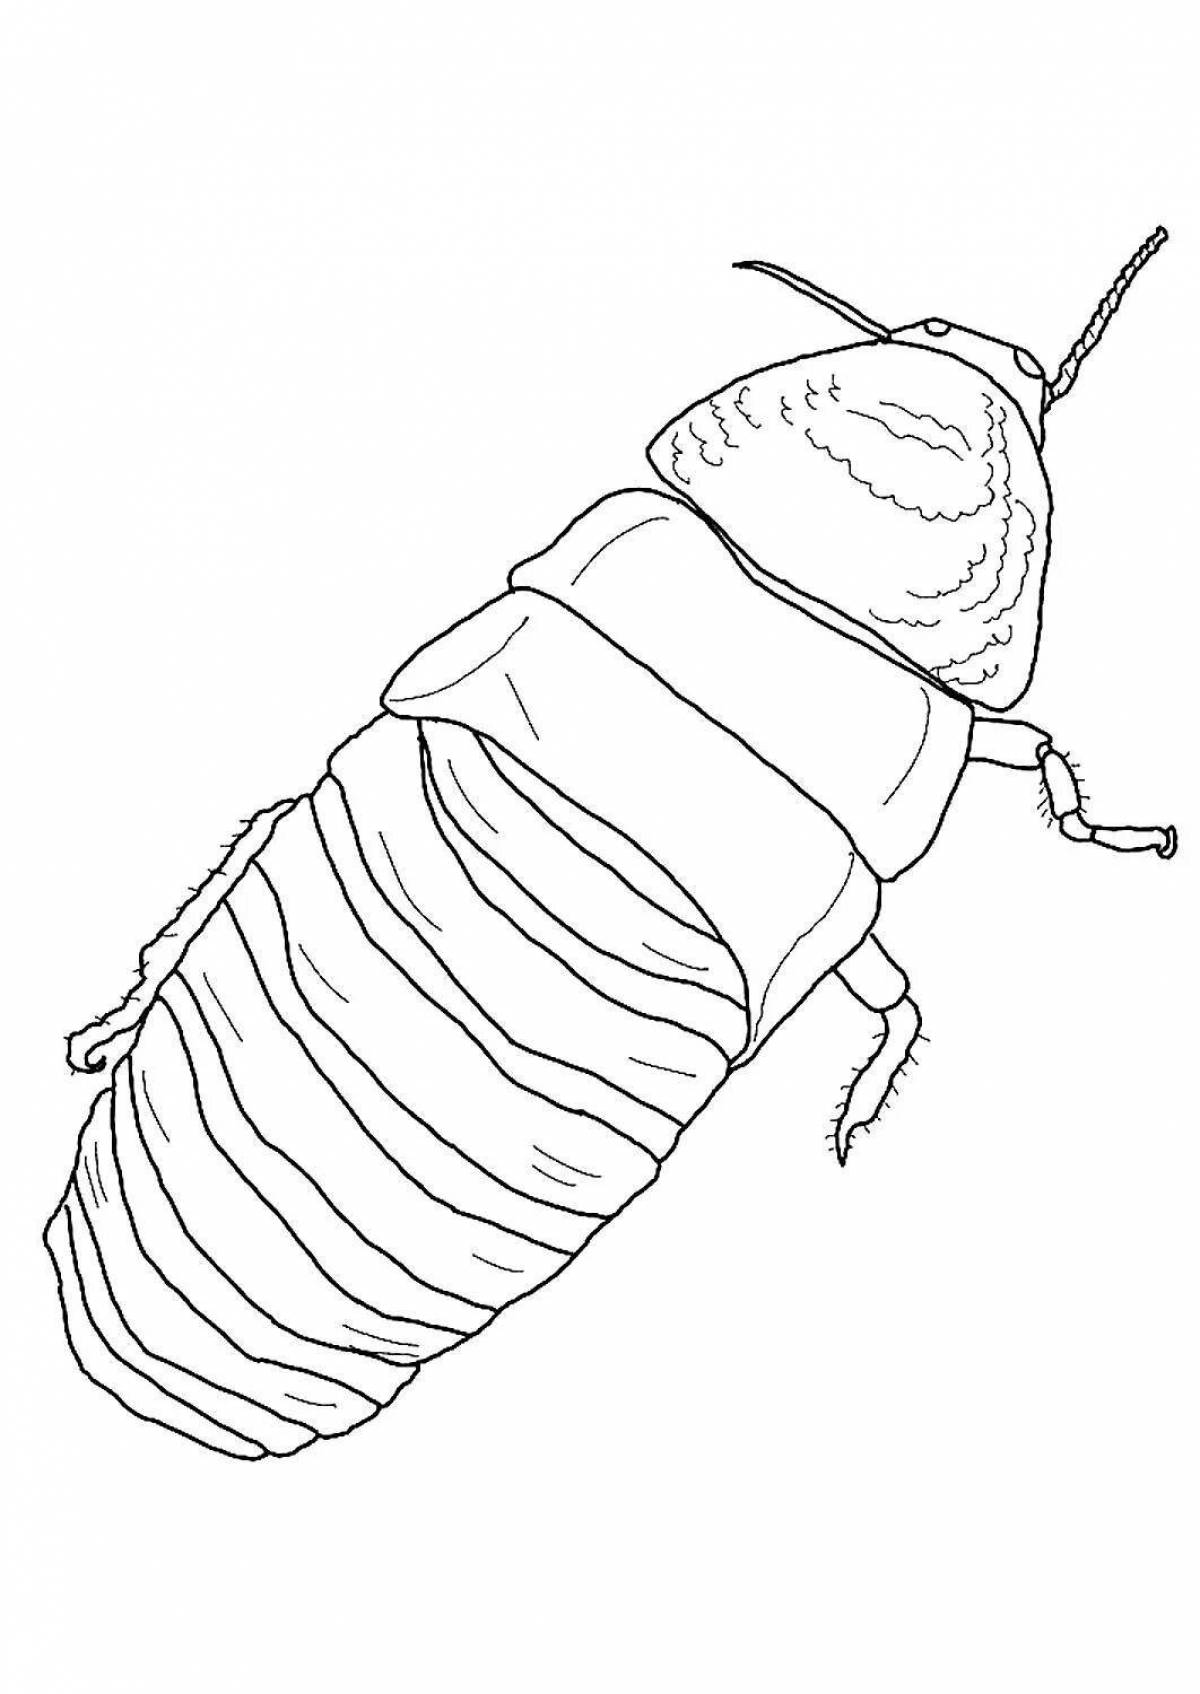 Cockroach for kids #3